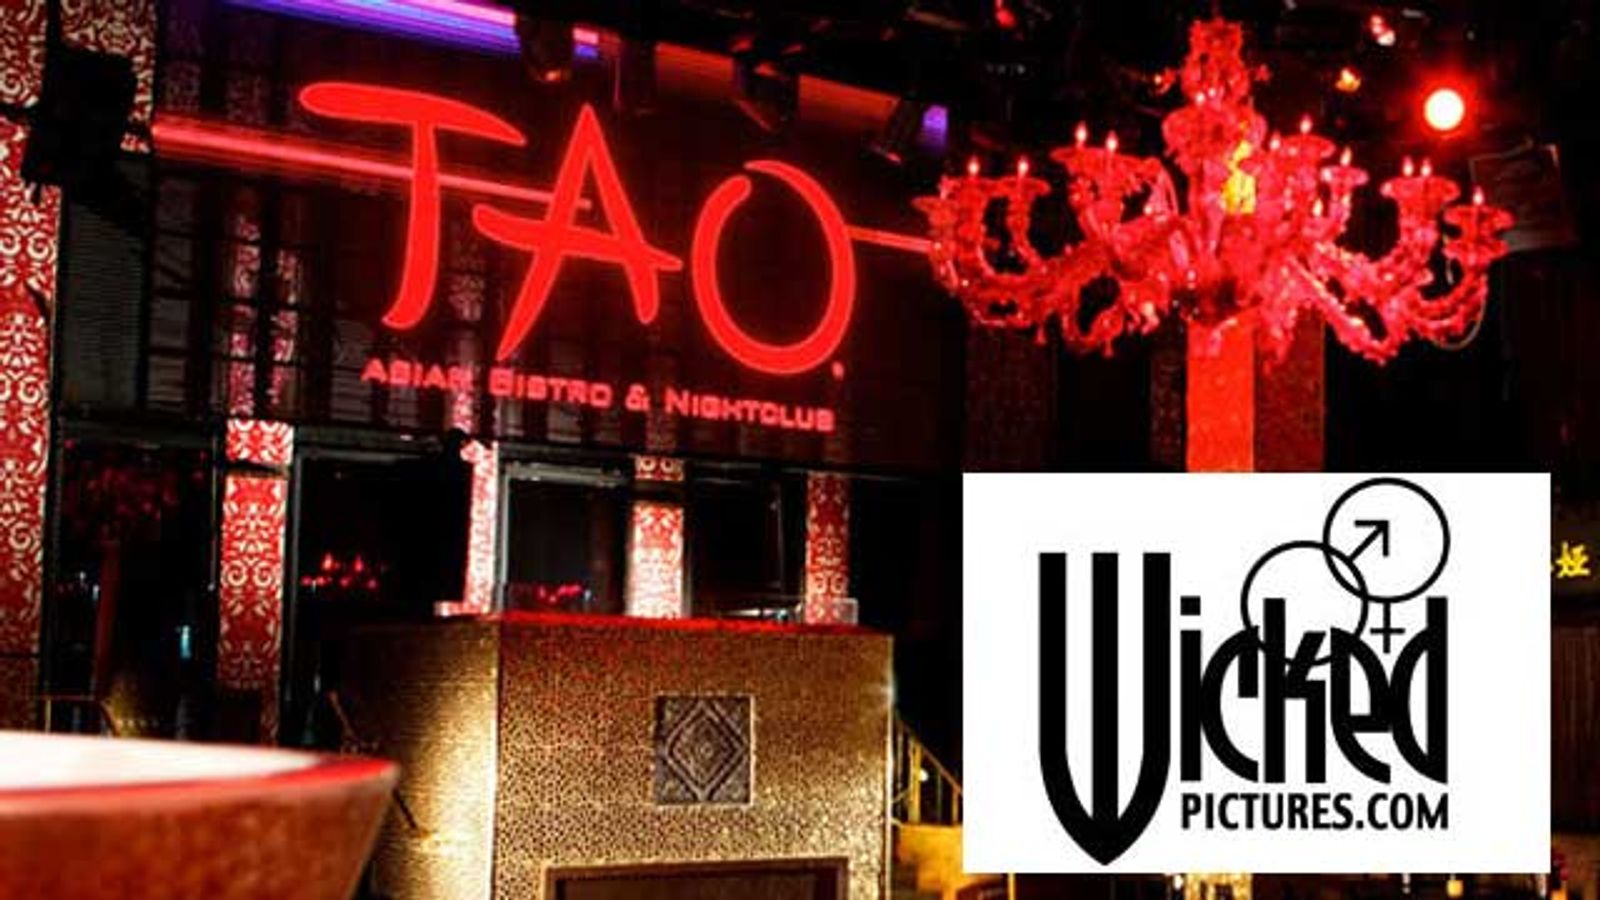 TAO Las Vegas To Host Official Wicked Pictures Party Tonight